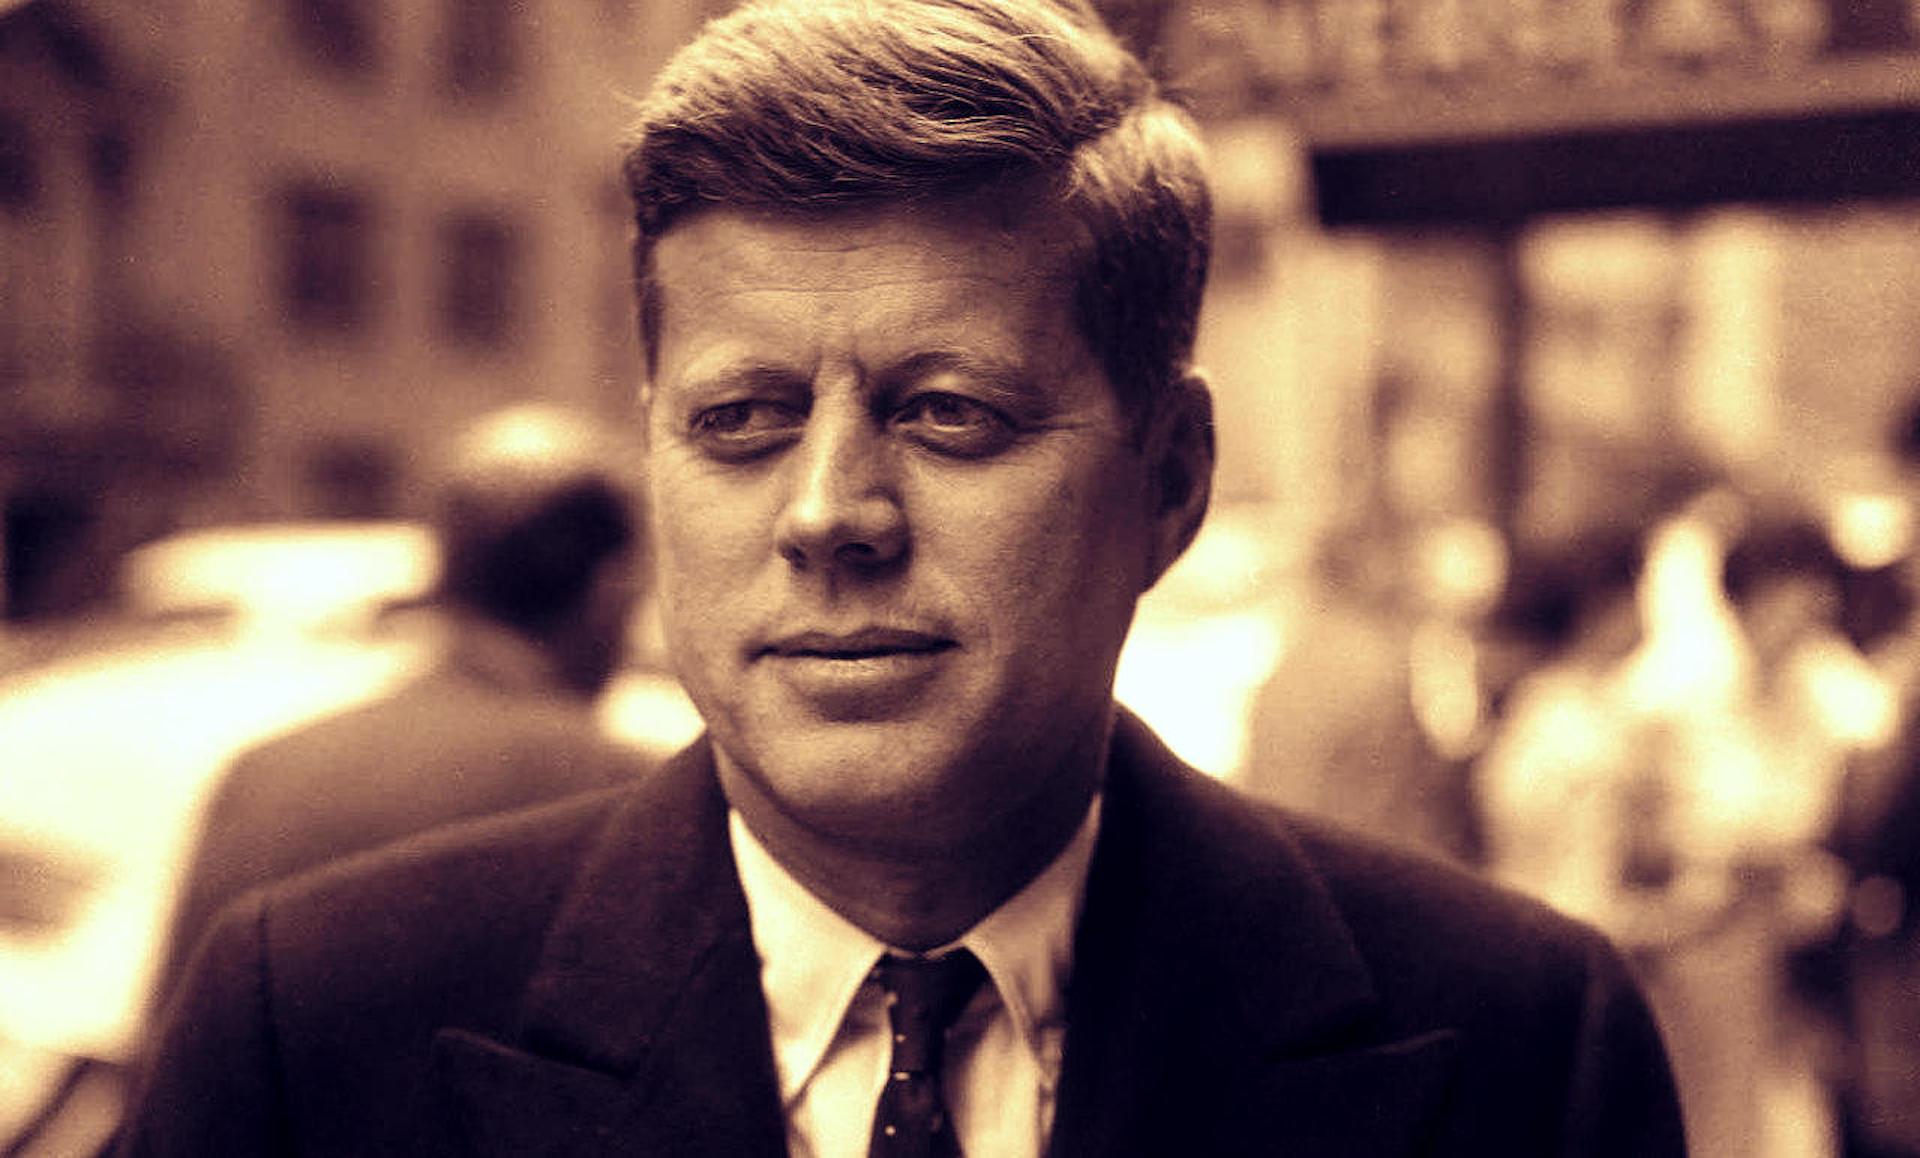 JFK: The steel deal and clash with Wall Street Pakistan Global